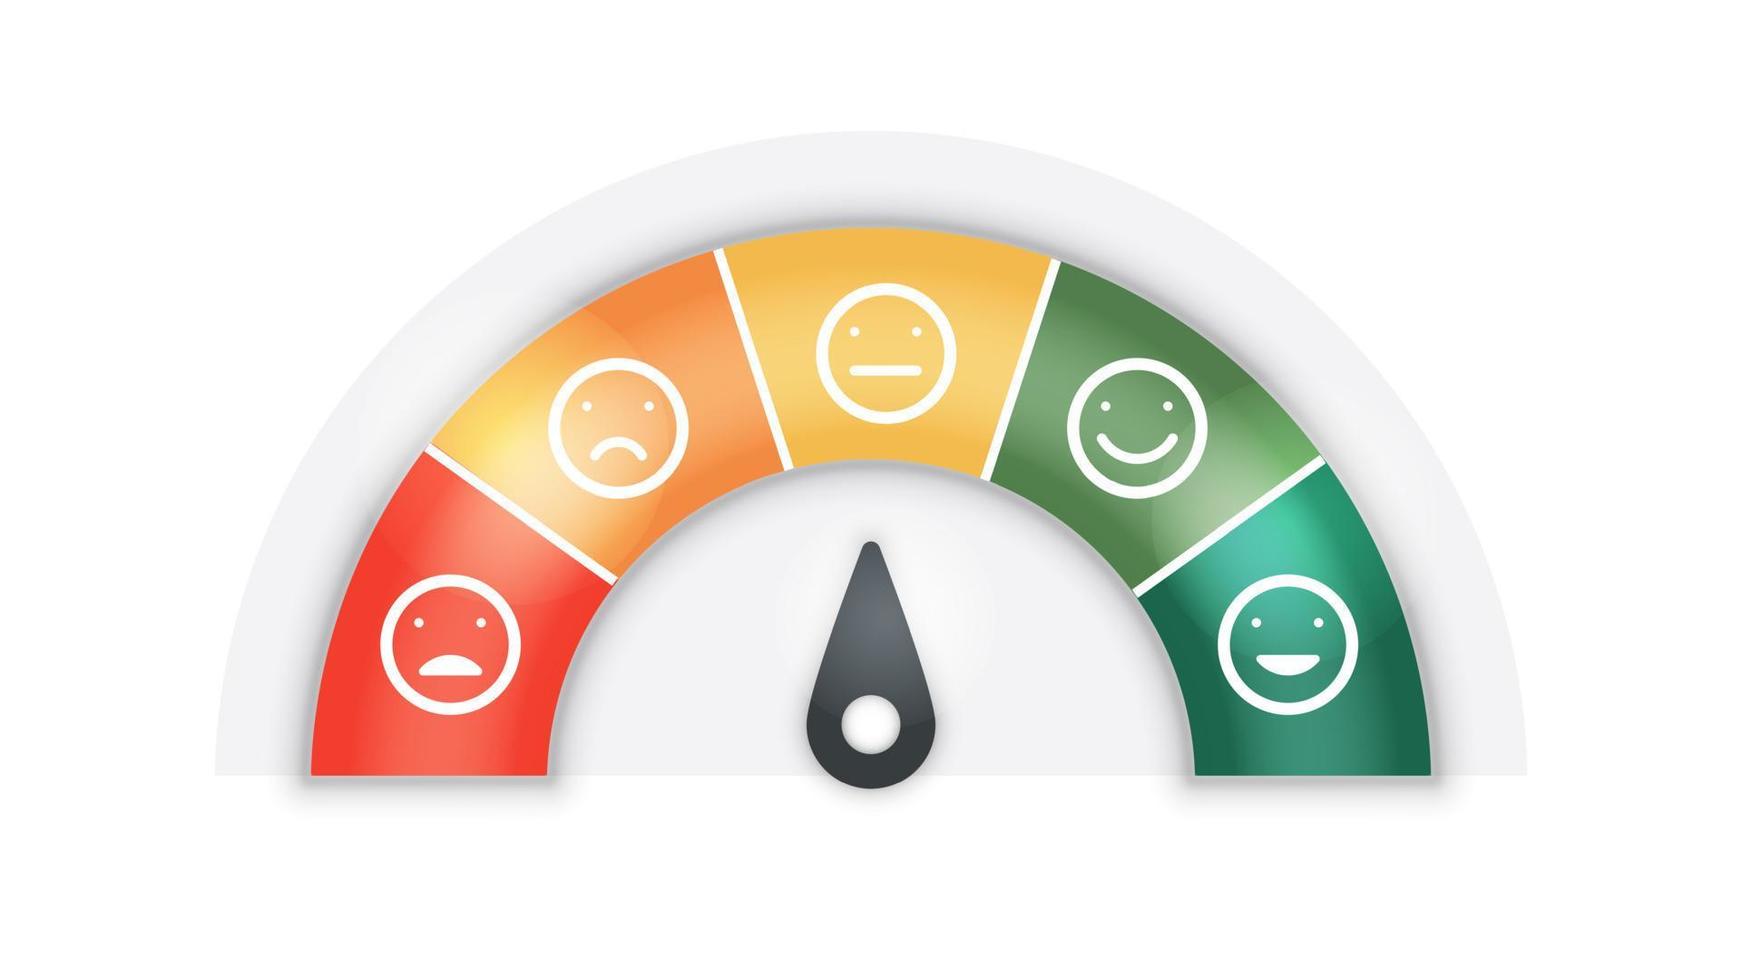 Customer experience satisfaction rating scale with a smile, angry icon in speedometer score feedback survey of a client. The level measures emoji face with arrows from bad to good vector illustration